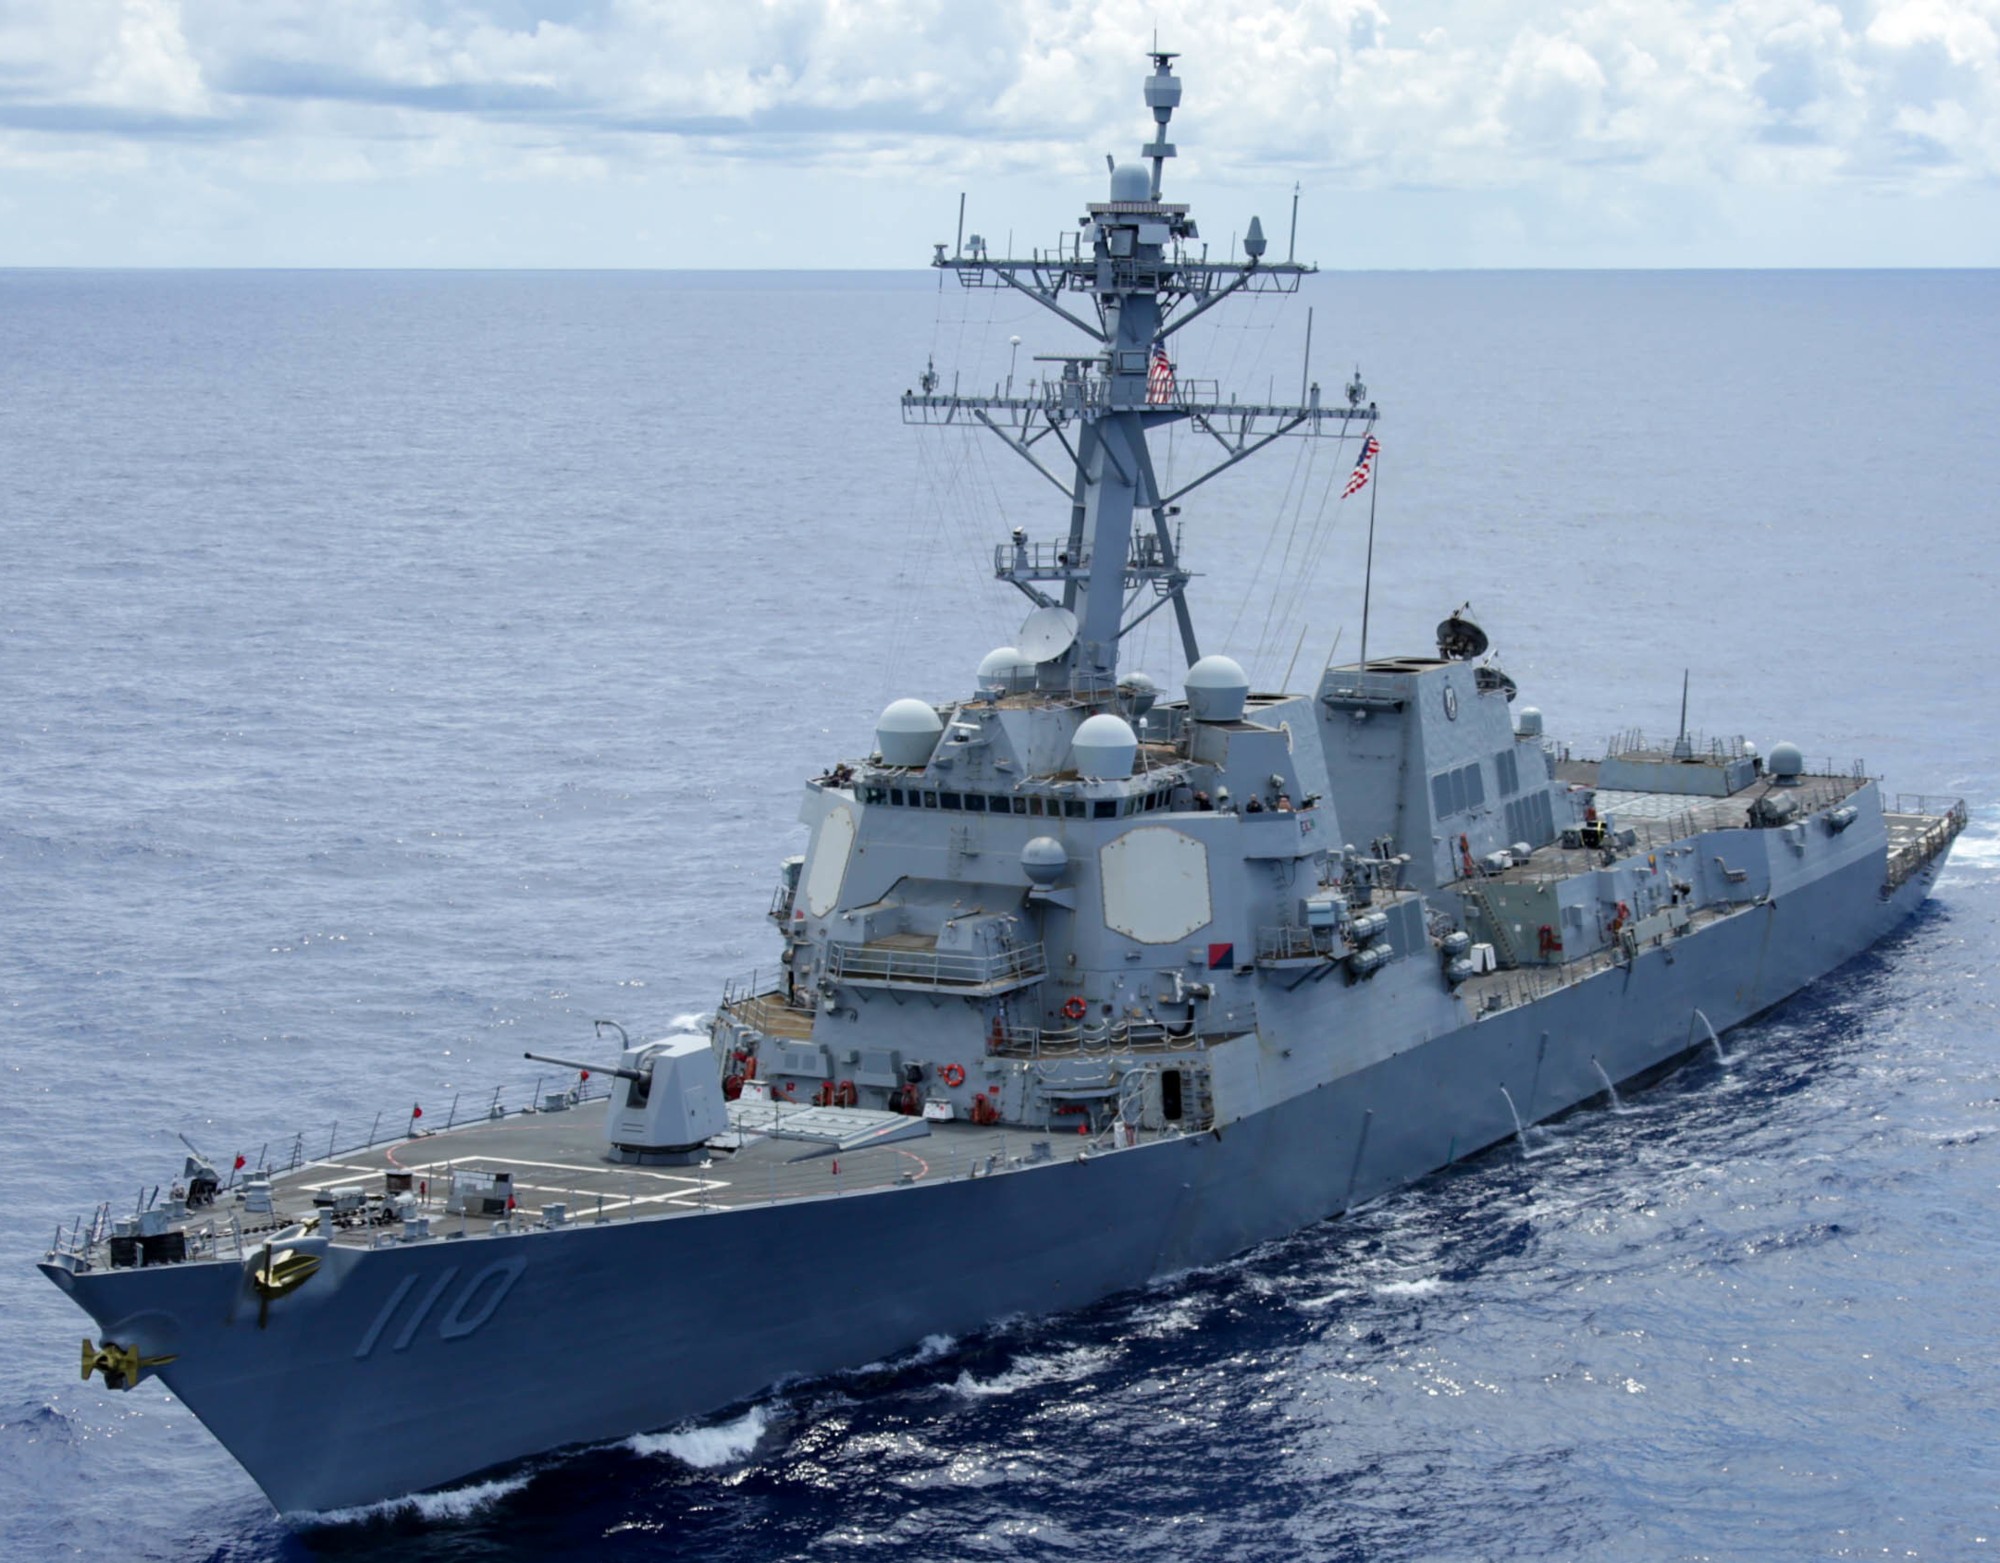 ddg-110 uss william p. lawrence arleigh burke class guided missile destroyer aegis us navy rimpac 22 86